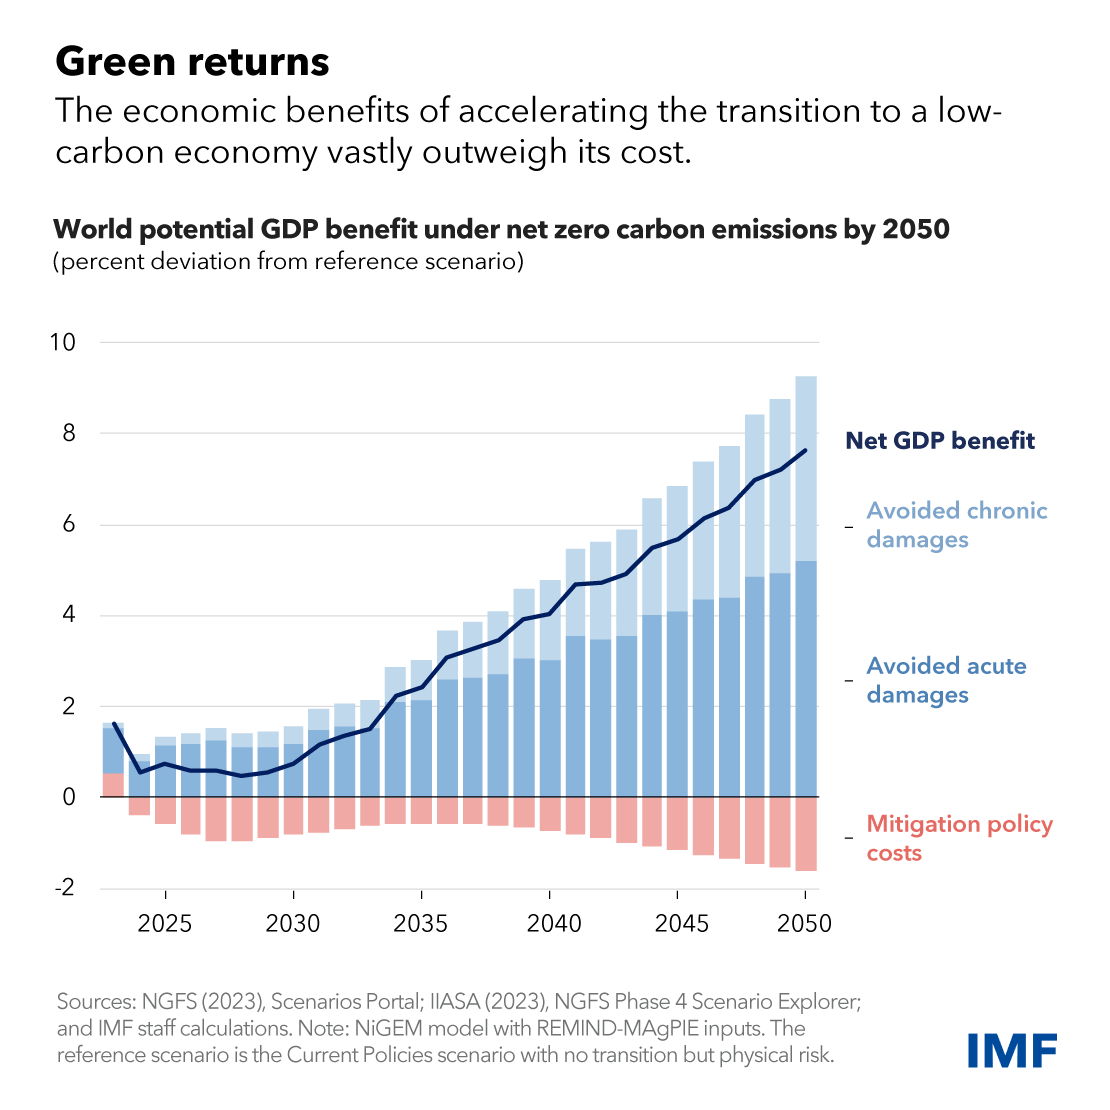 IMF graph demonstrating from 2025-2050 how the world potential GDP would benefit under a net zero scenario by avoided chronic damages and avoided acute damages significantly outweighing mitigation policy costs